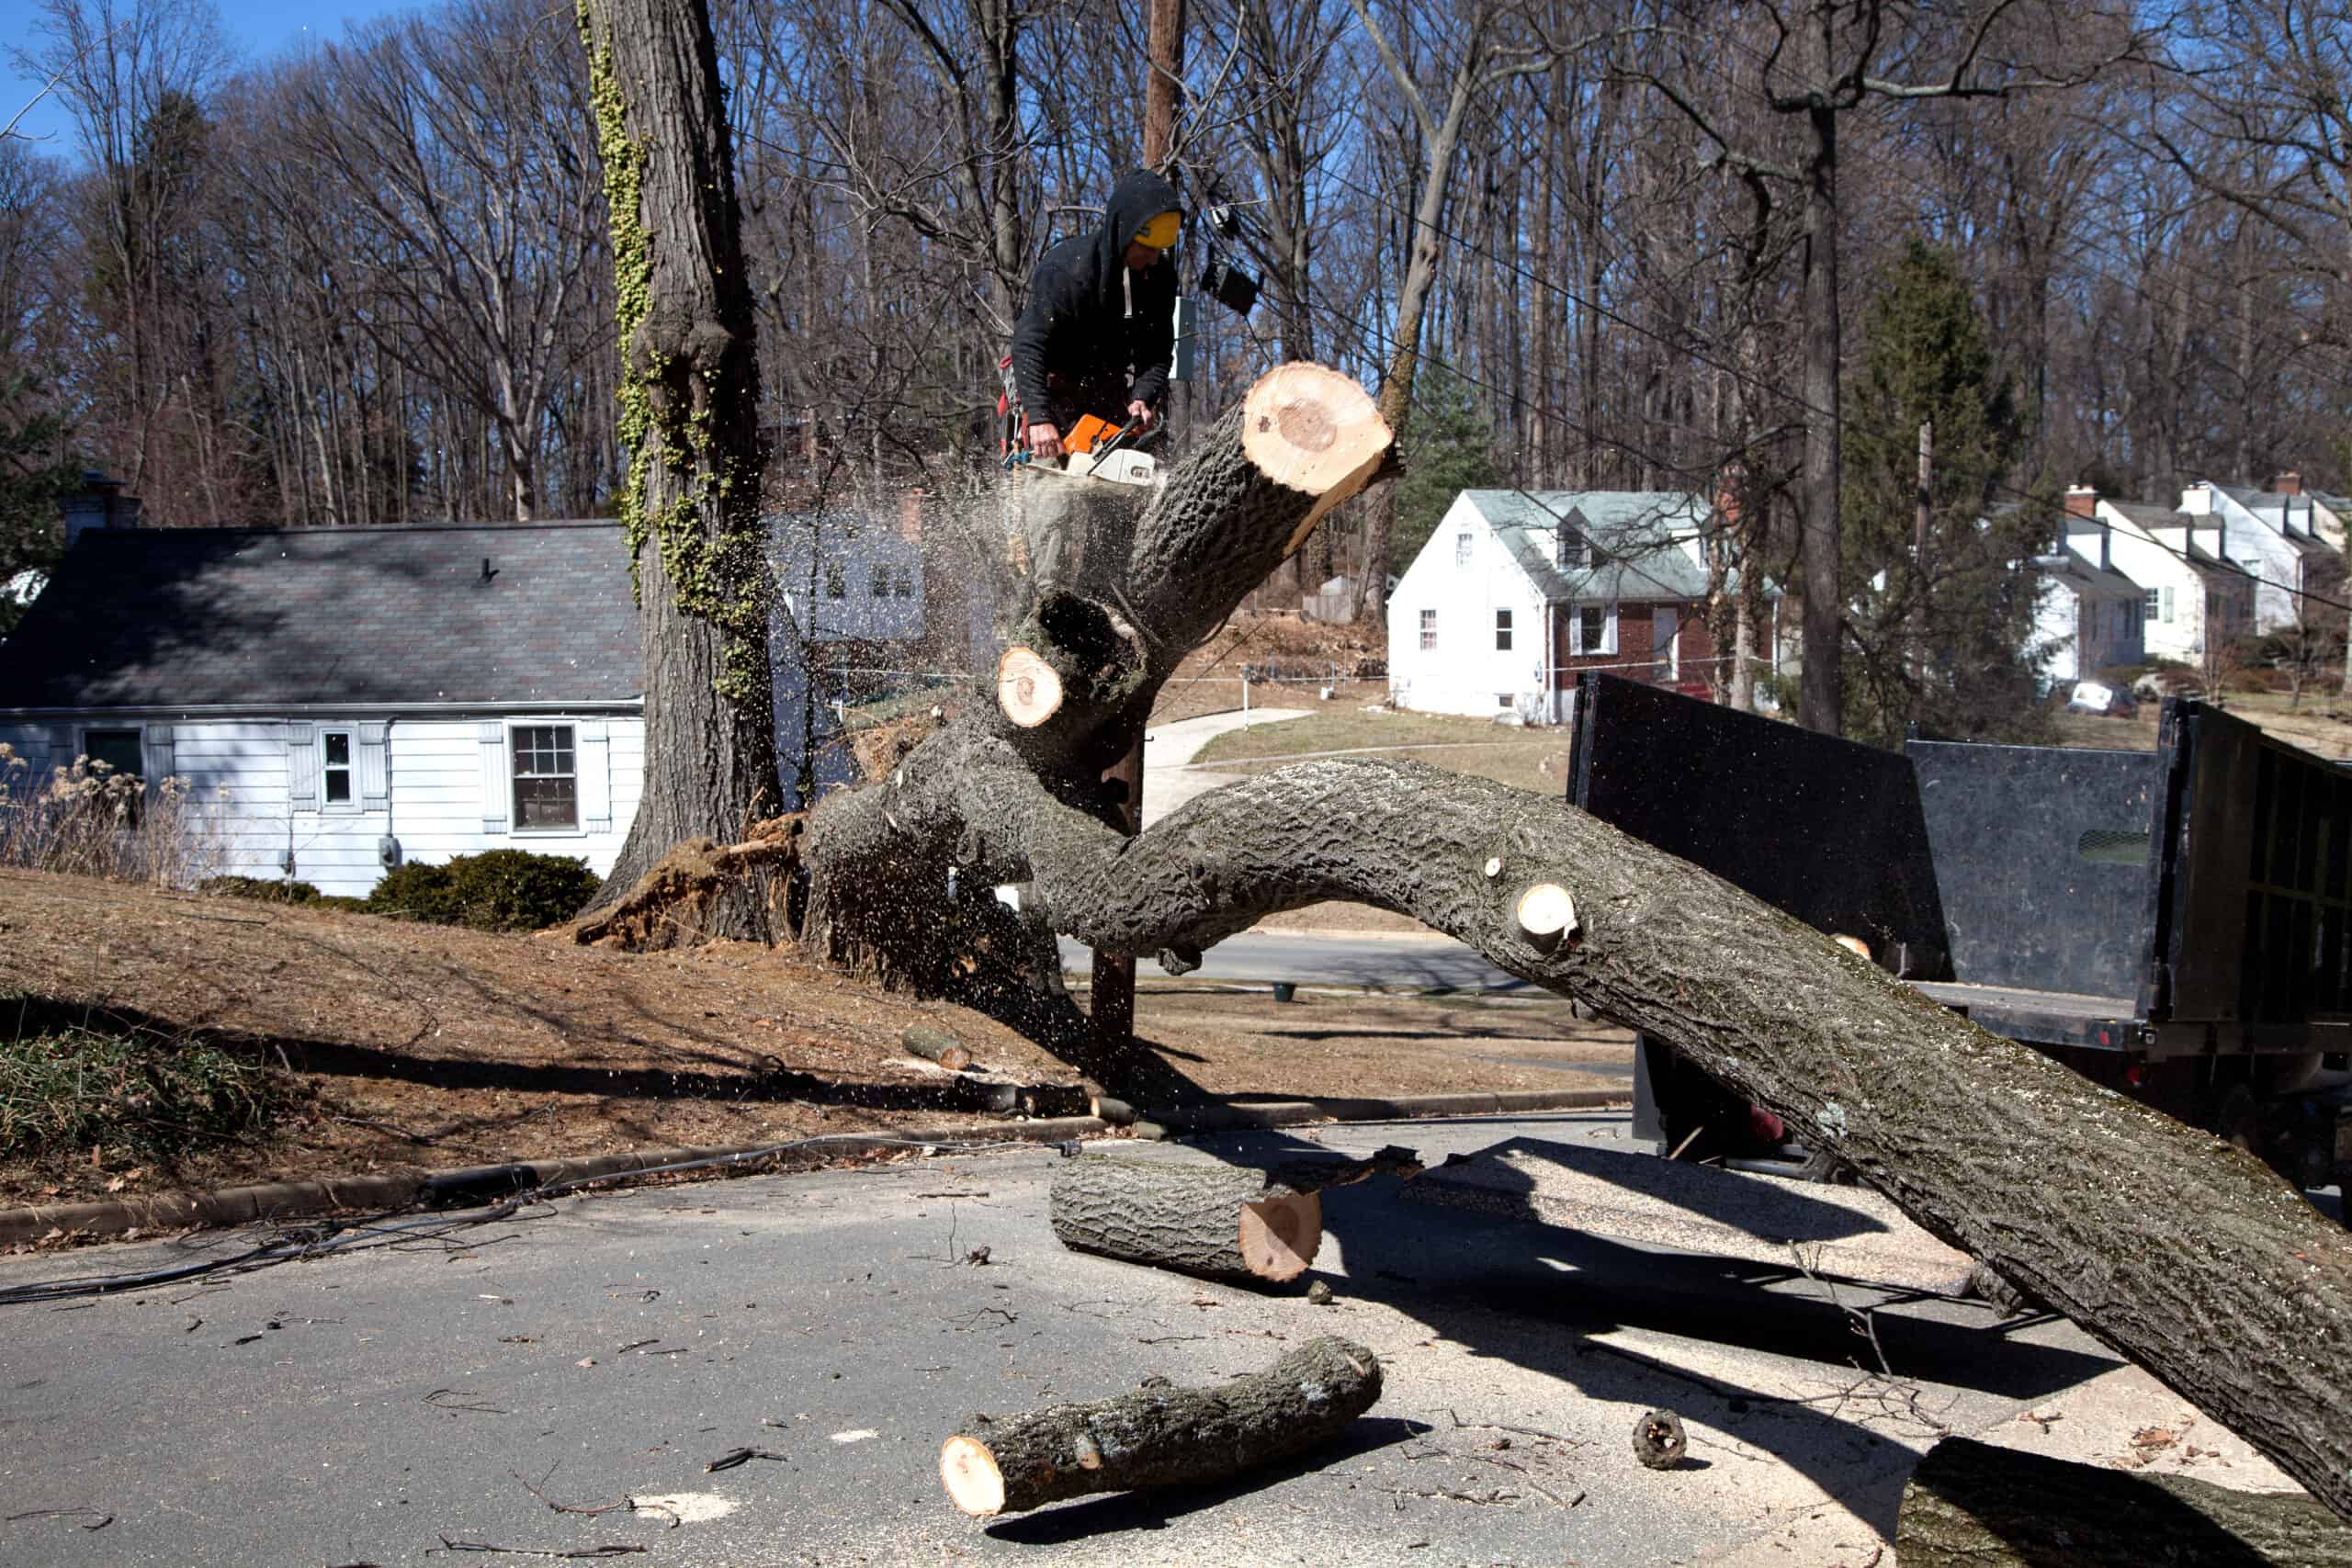 Man working on cutting uprooted tree blocking roads due to gusty wind